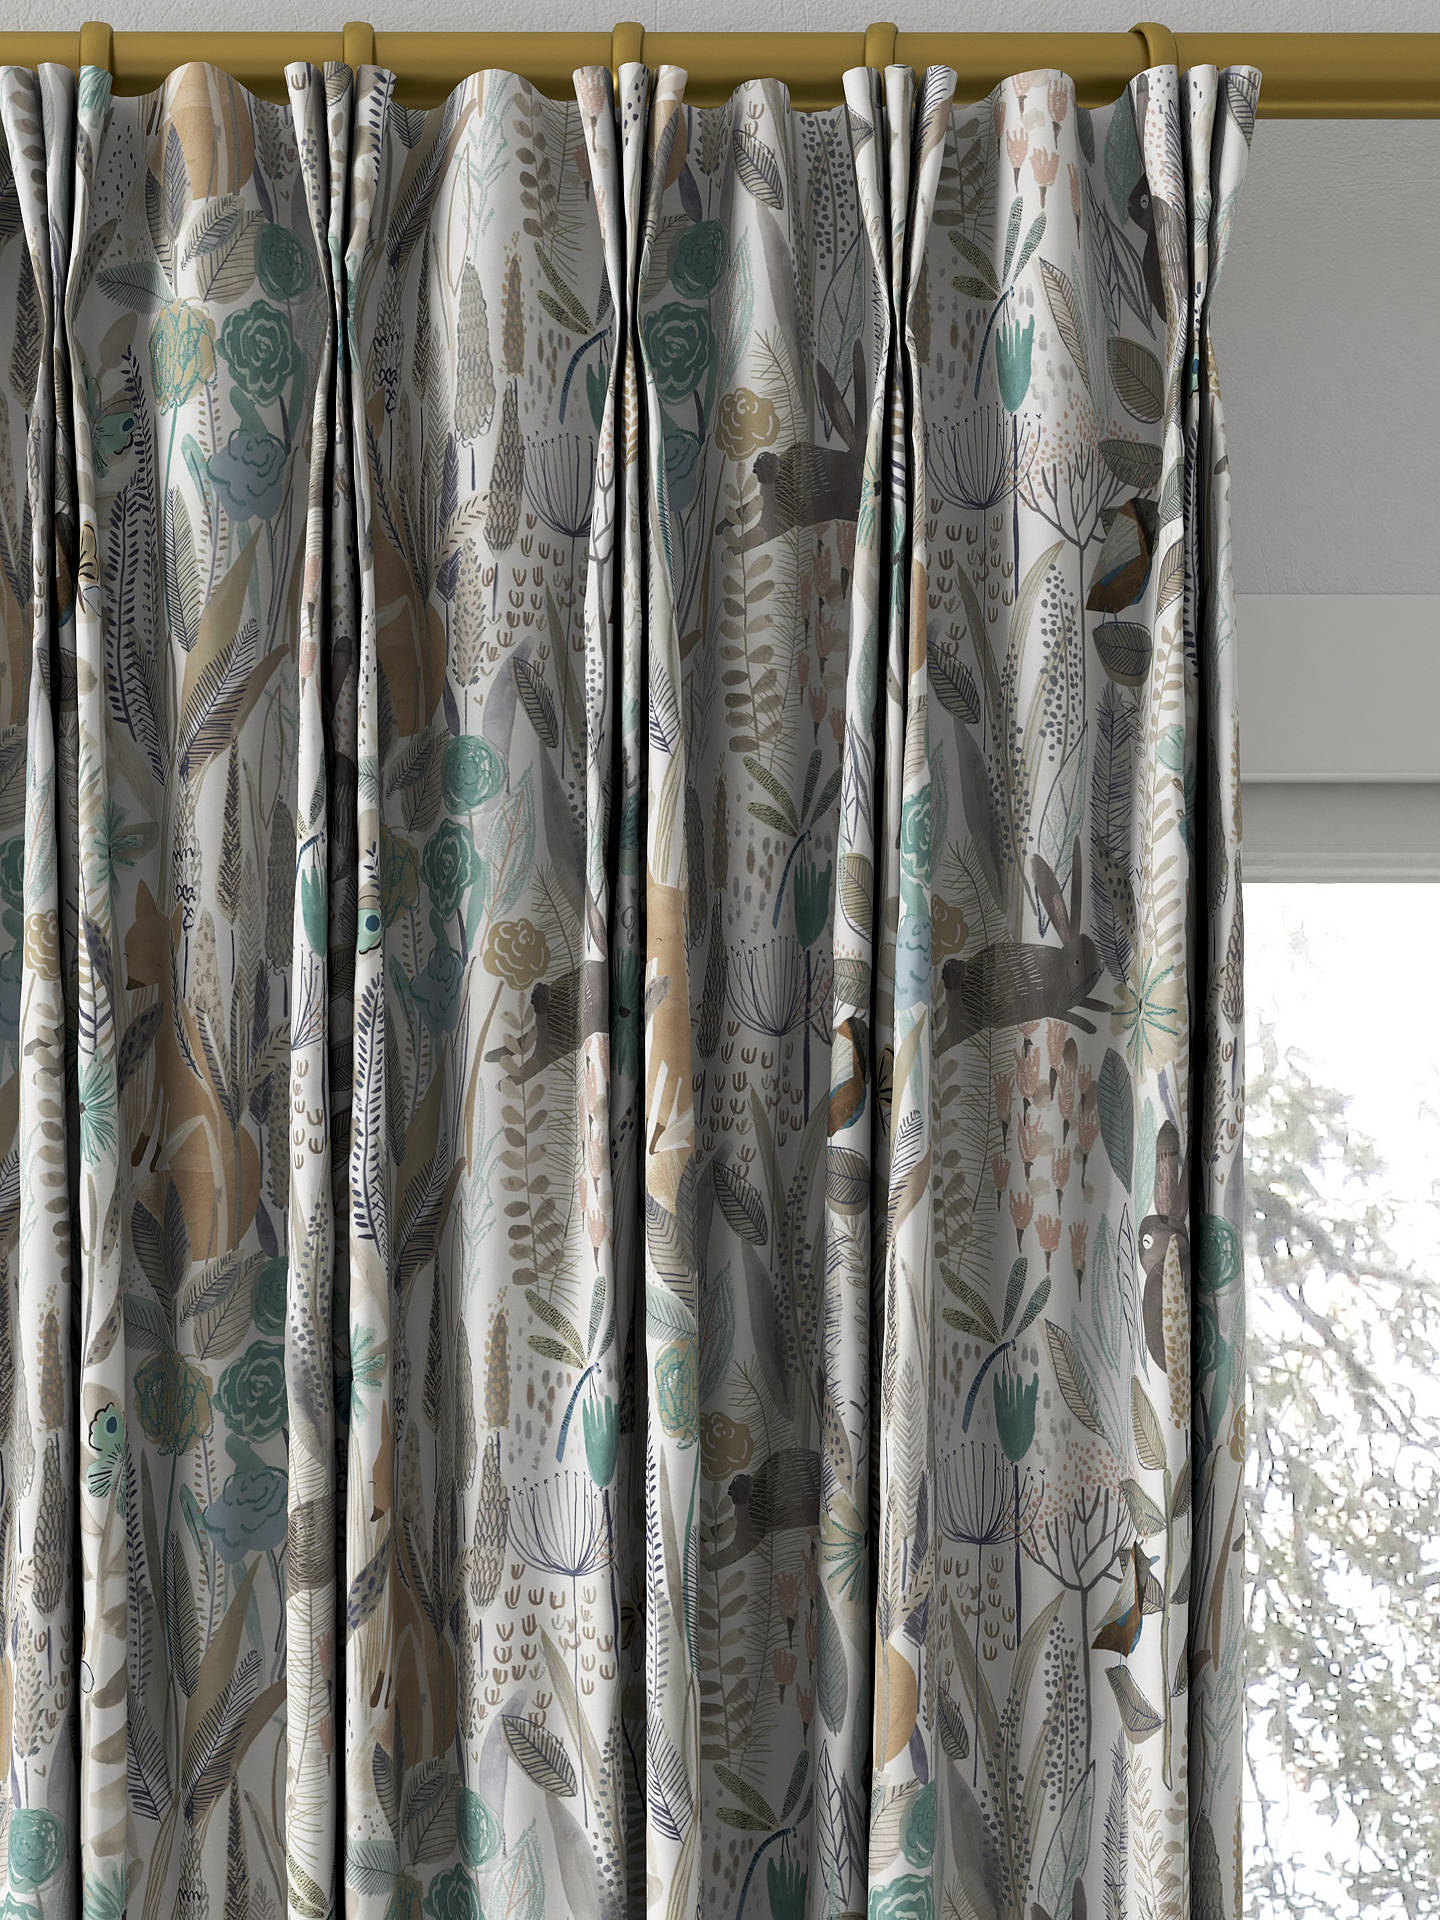 Harlequin Hide And Seek Made to Measure Curtains, Linen/Duck Egg/Stone